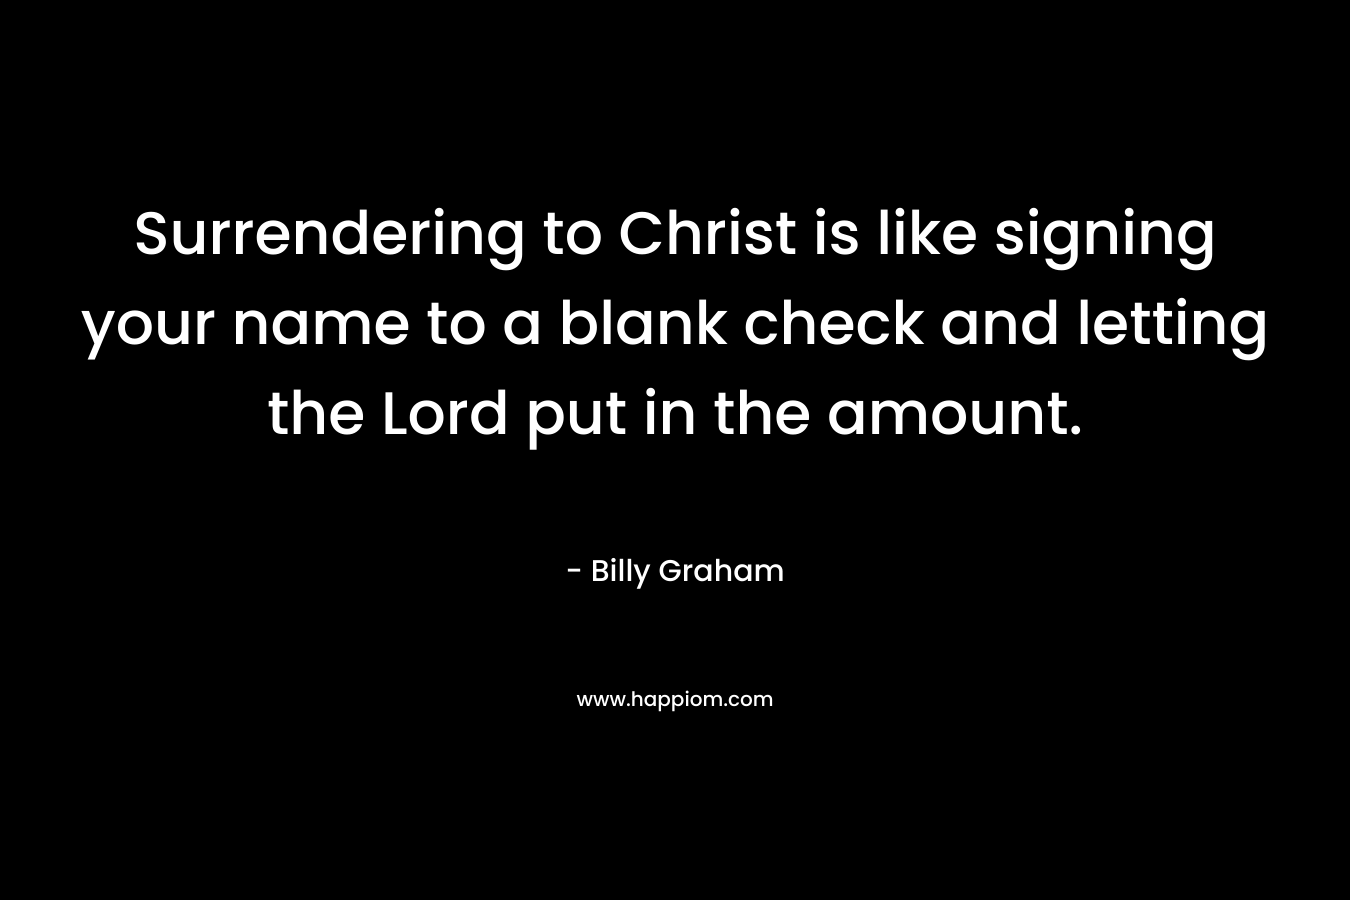 Surrendering to Christ is like signing your name to a blank check and letting the Lord put in the amount. – Billy Graham